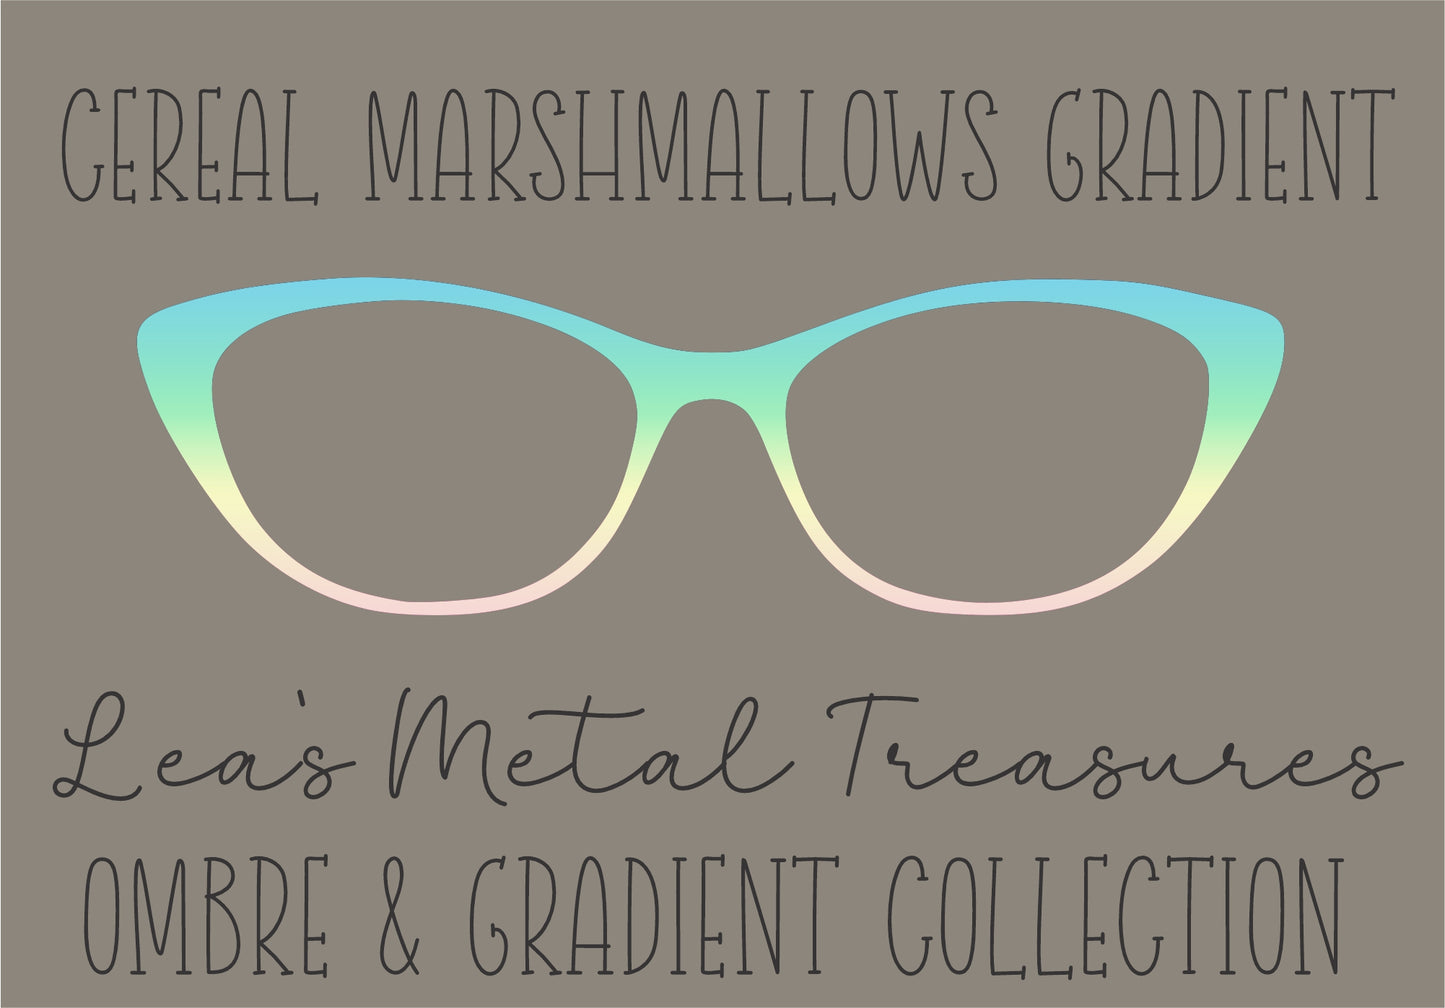 Cereal Marshmallows Gradient Eyewear Frame Toppers COMES WITH MAGNETS